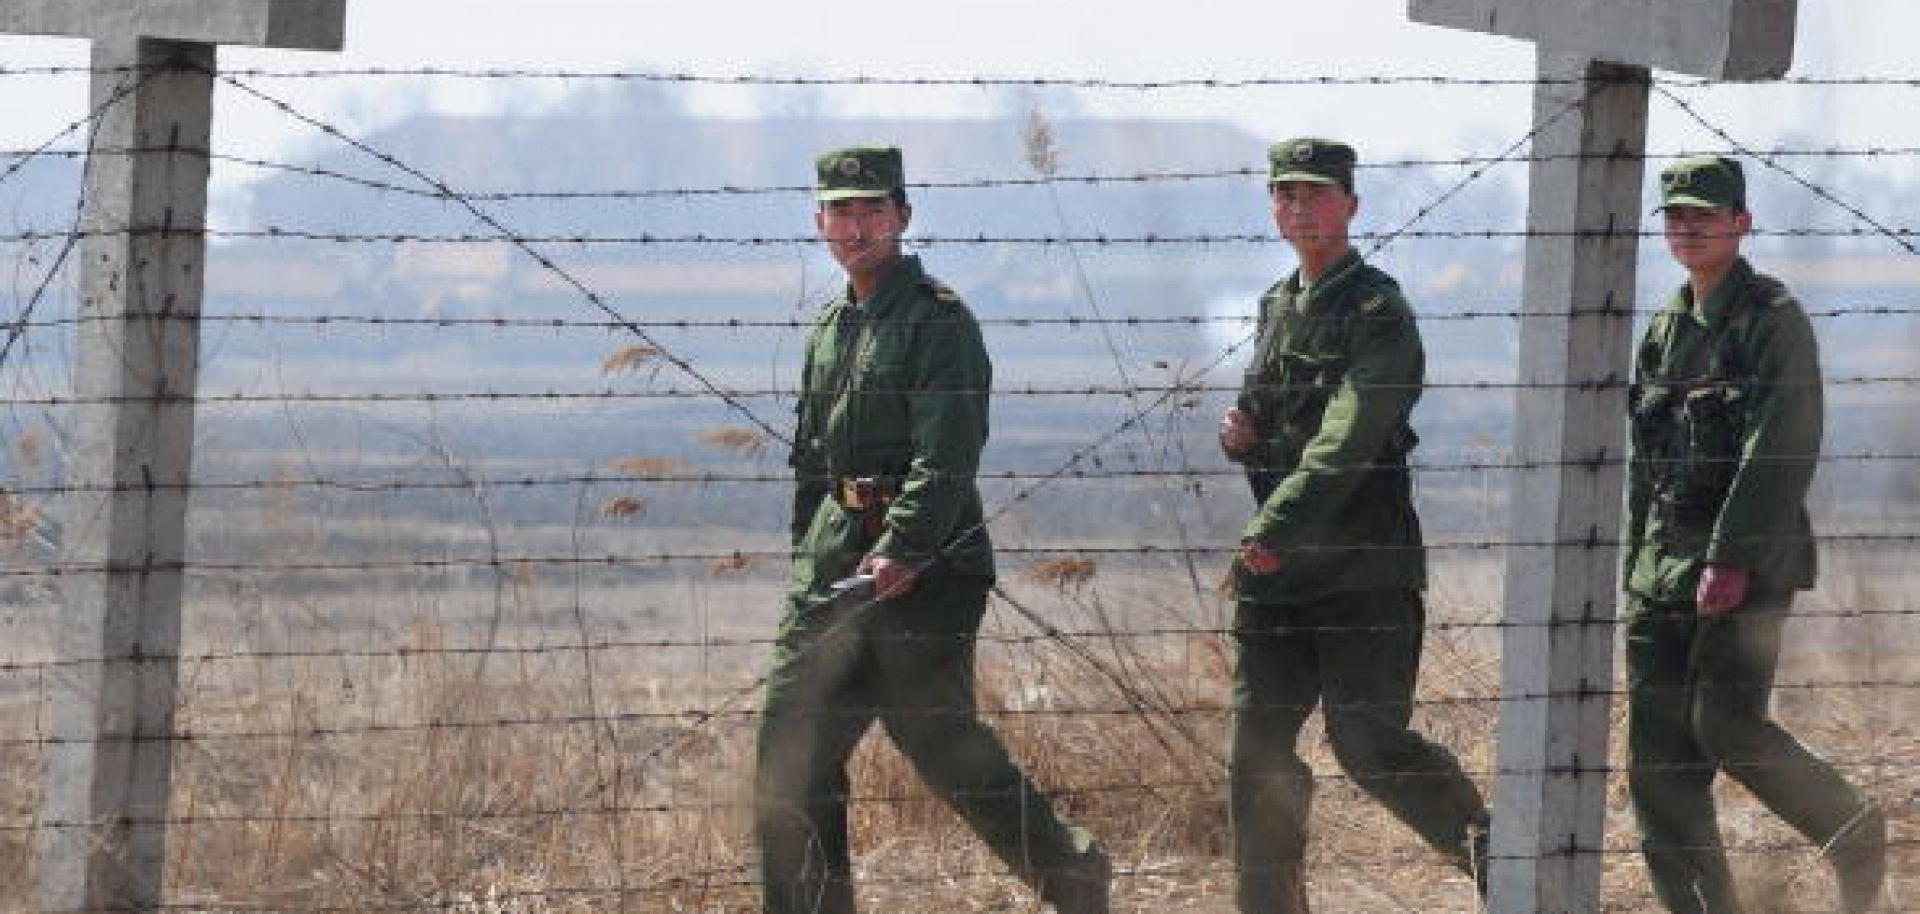 Chinese soldiers patrol the North Korea-China border on April 5, 2009